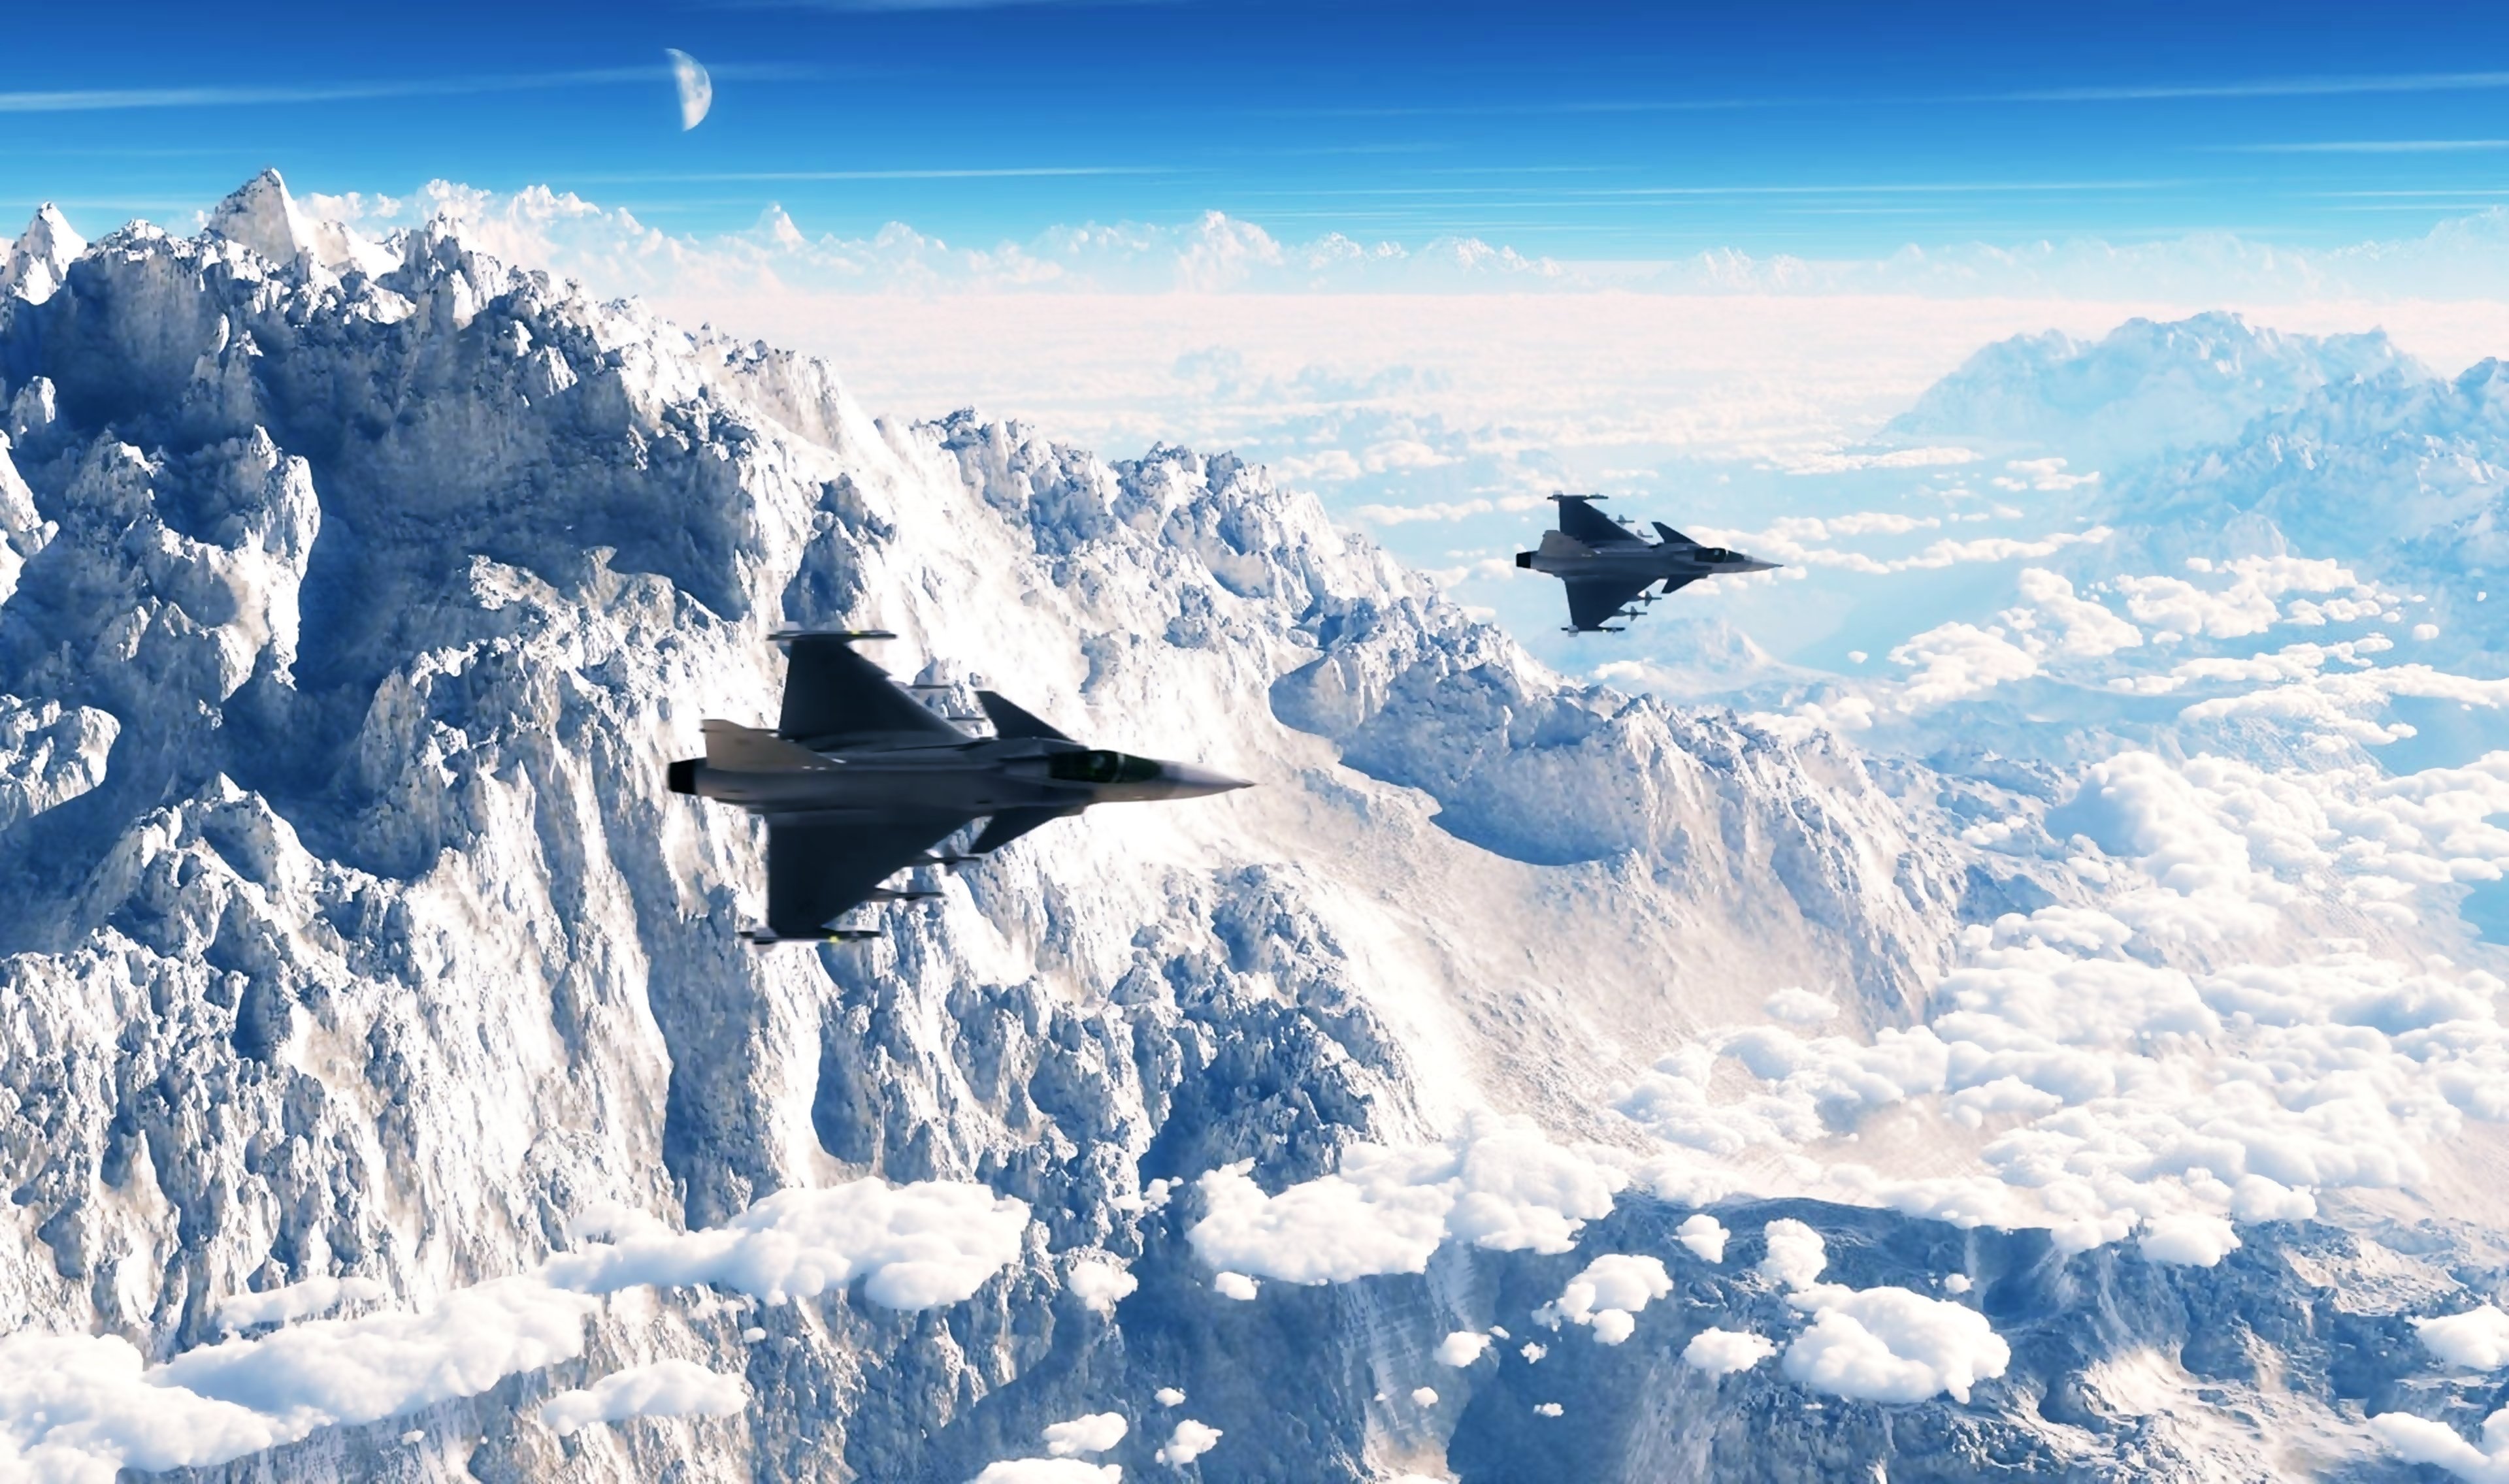 aircrafts, Attack, Black, Bombing, Clouds, Earth, Flights, Landscapes, Military, Nature, Sky, Warplanes, Review Wallpaper